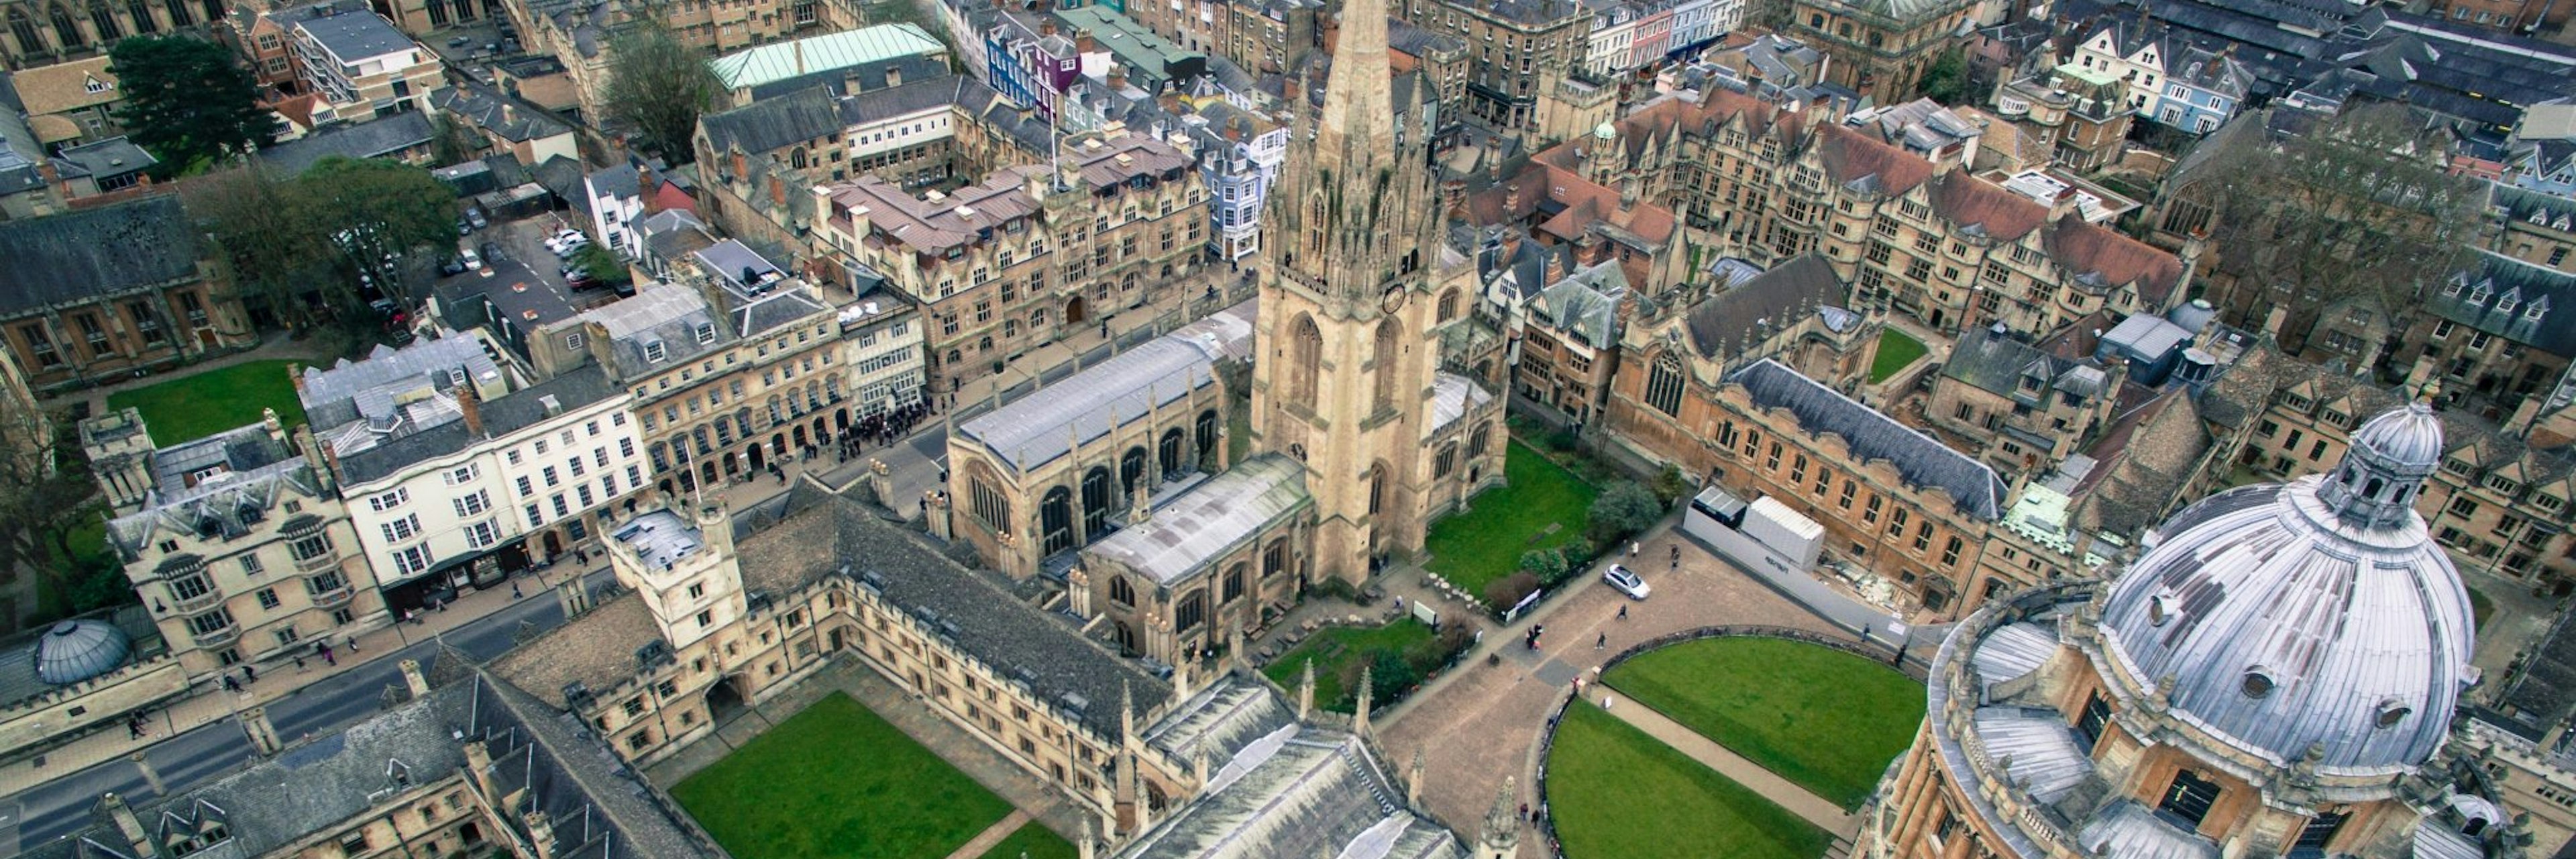 University of Oxford from a drone